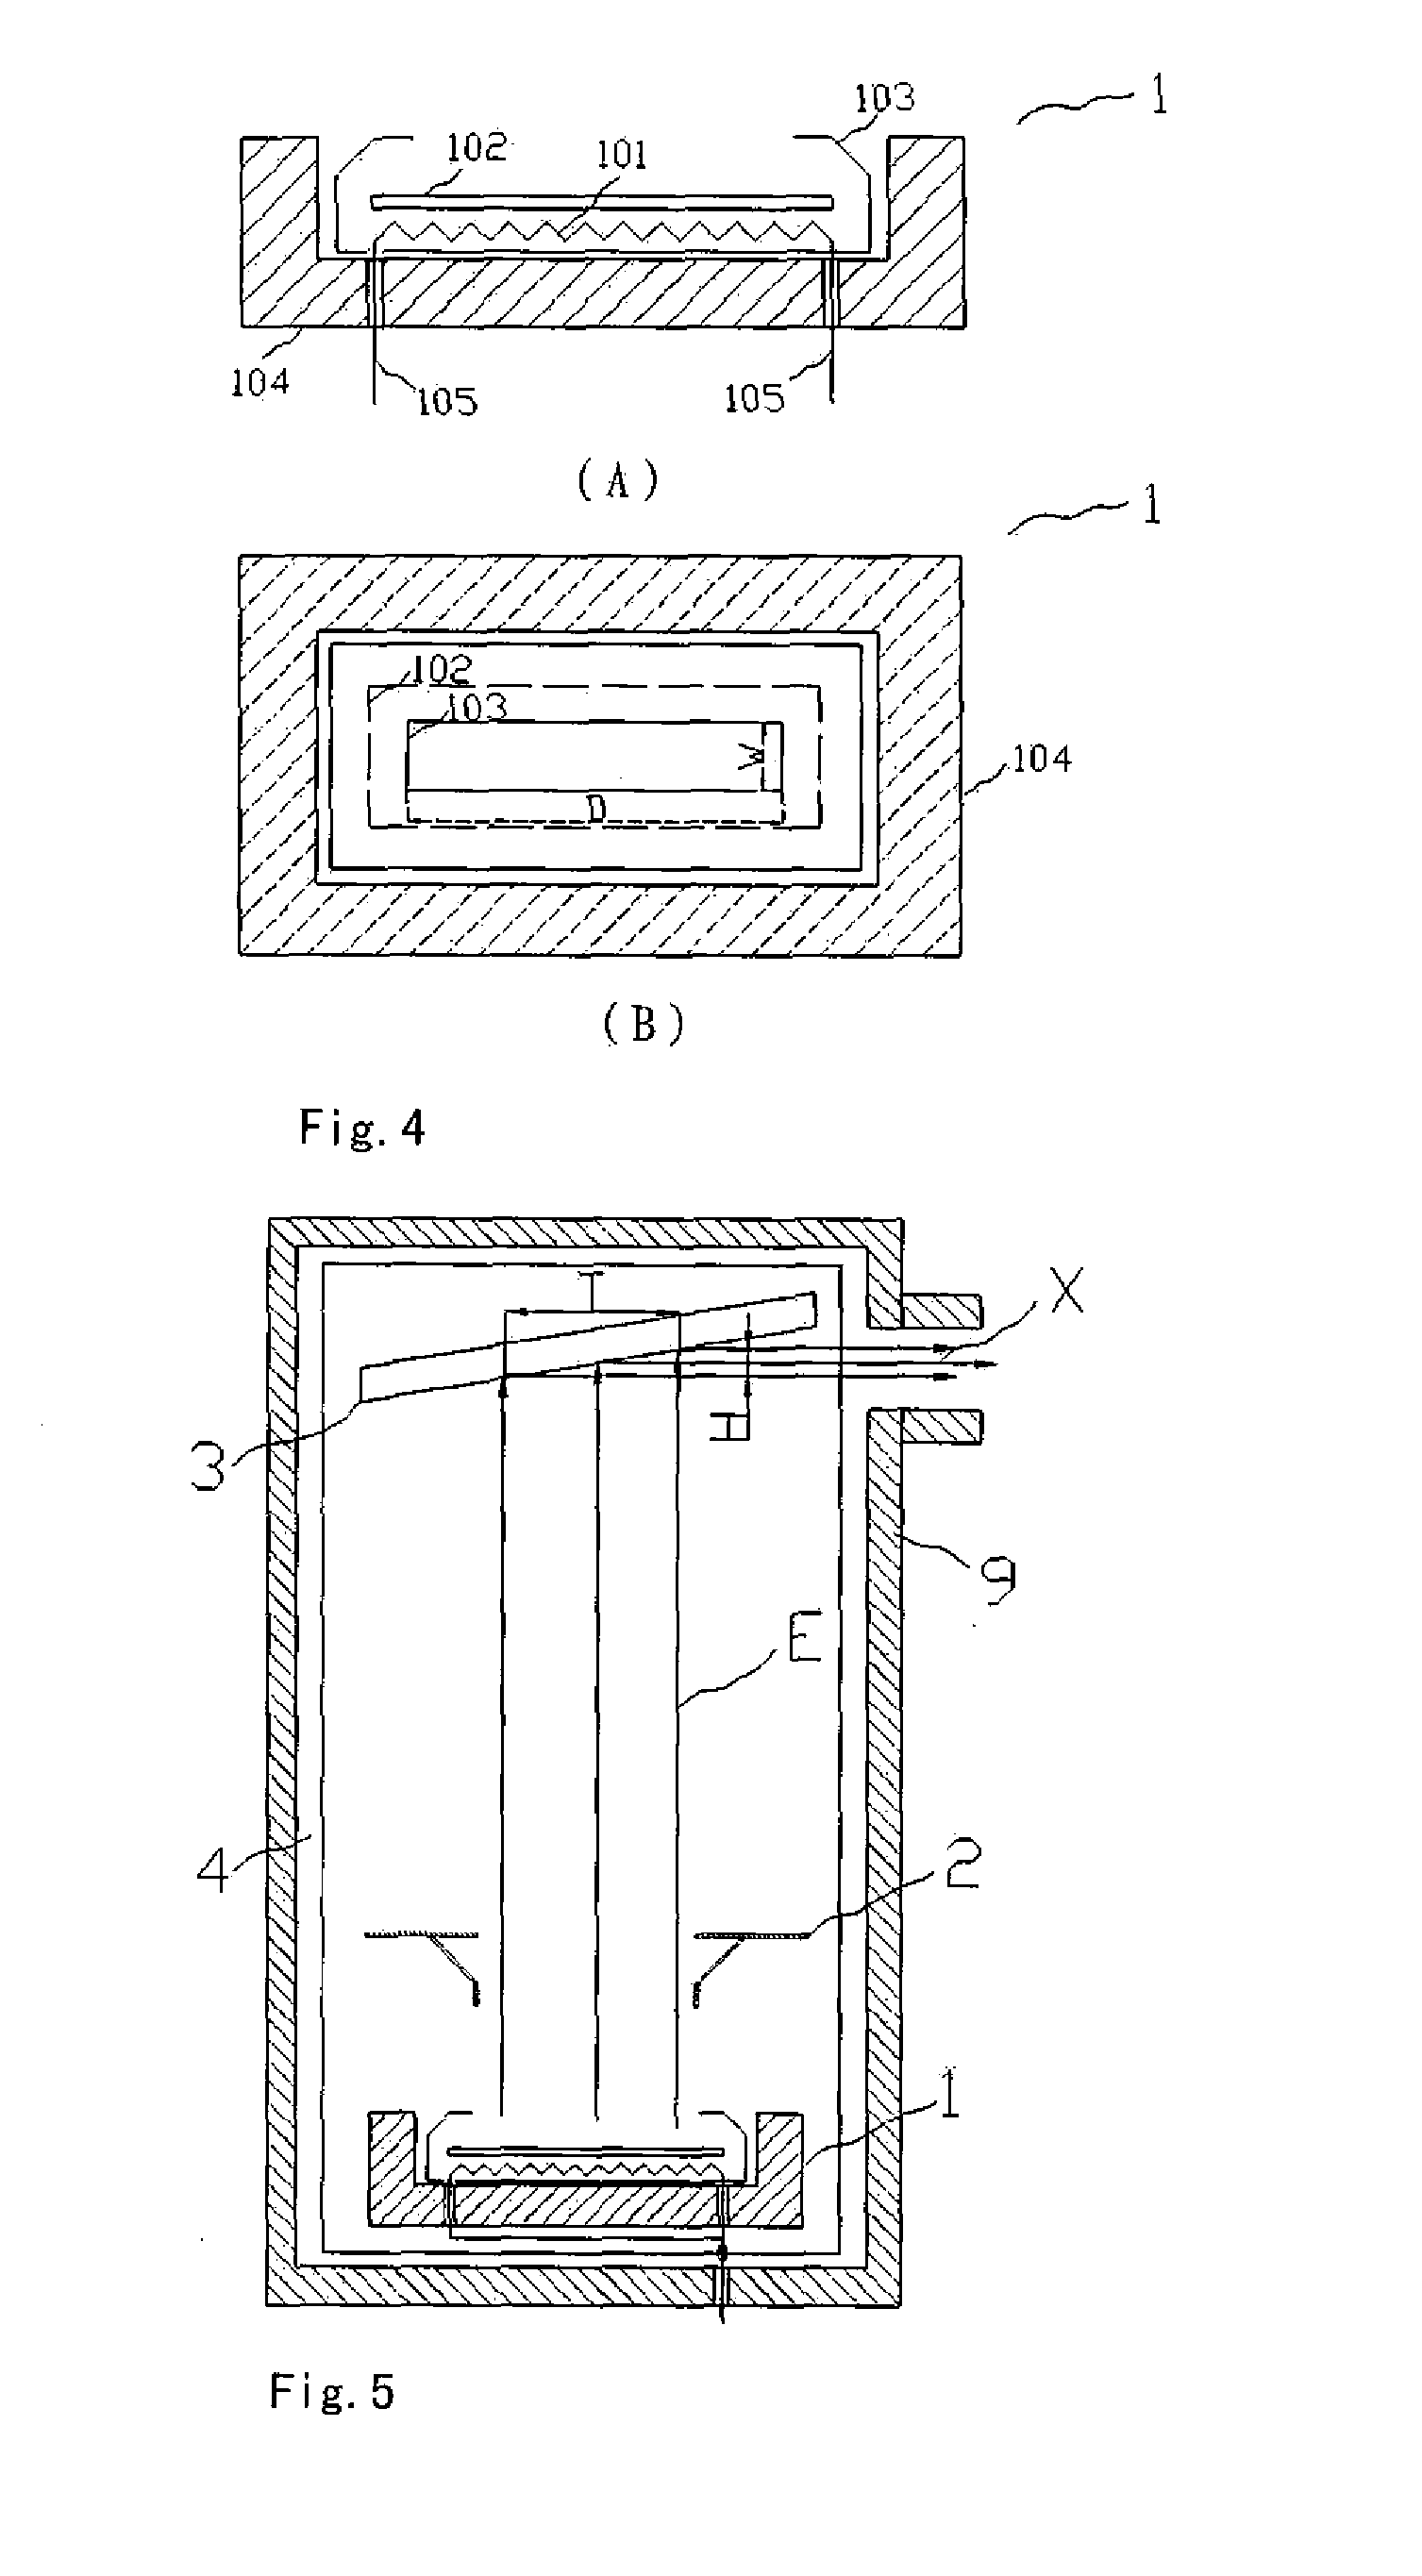 Cathode control multi-cathode distributed x-ray apparatus and ct device having said apparatus